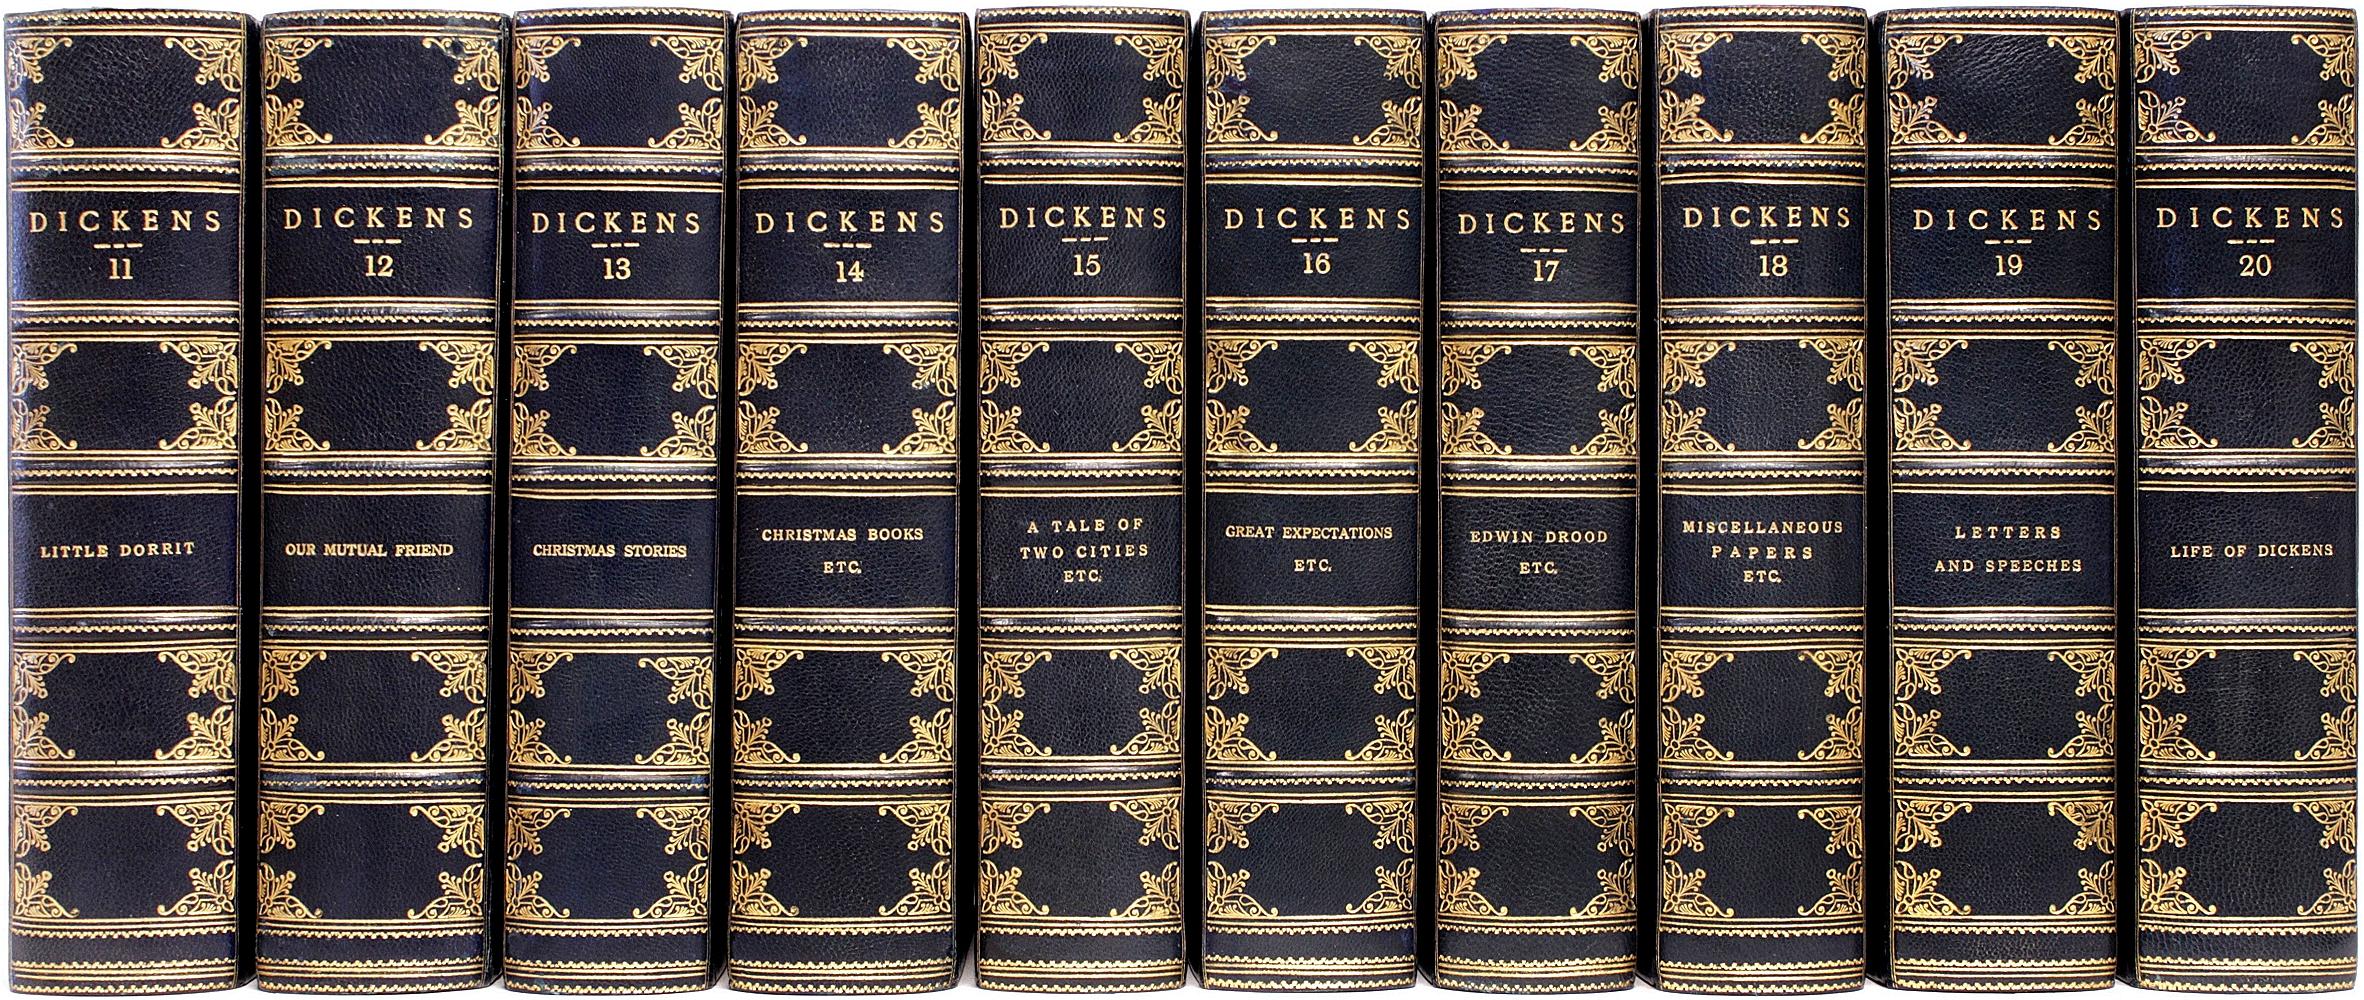 Author: DICKENS, Charles. 

Title: The Complete Works Of Charles Dickens.

Publisher: NY: Bigelow, Brown & Co., Inc., n.d. (c.1920's)

NATIONAL LIBRARY EDITION. 20 vols., 8-3/8